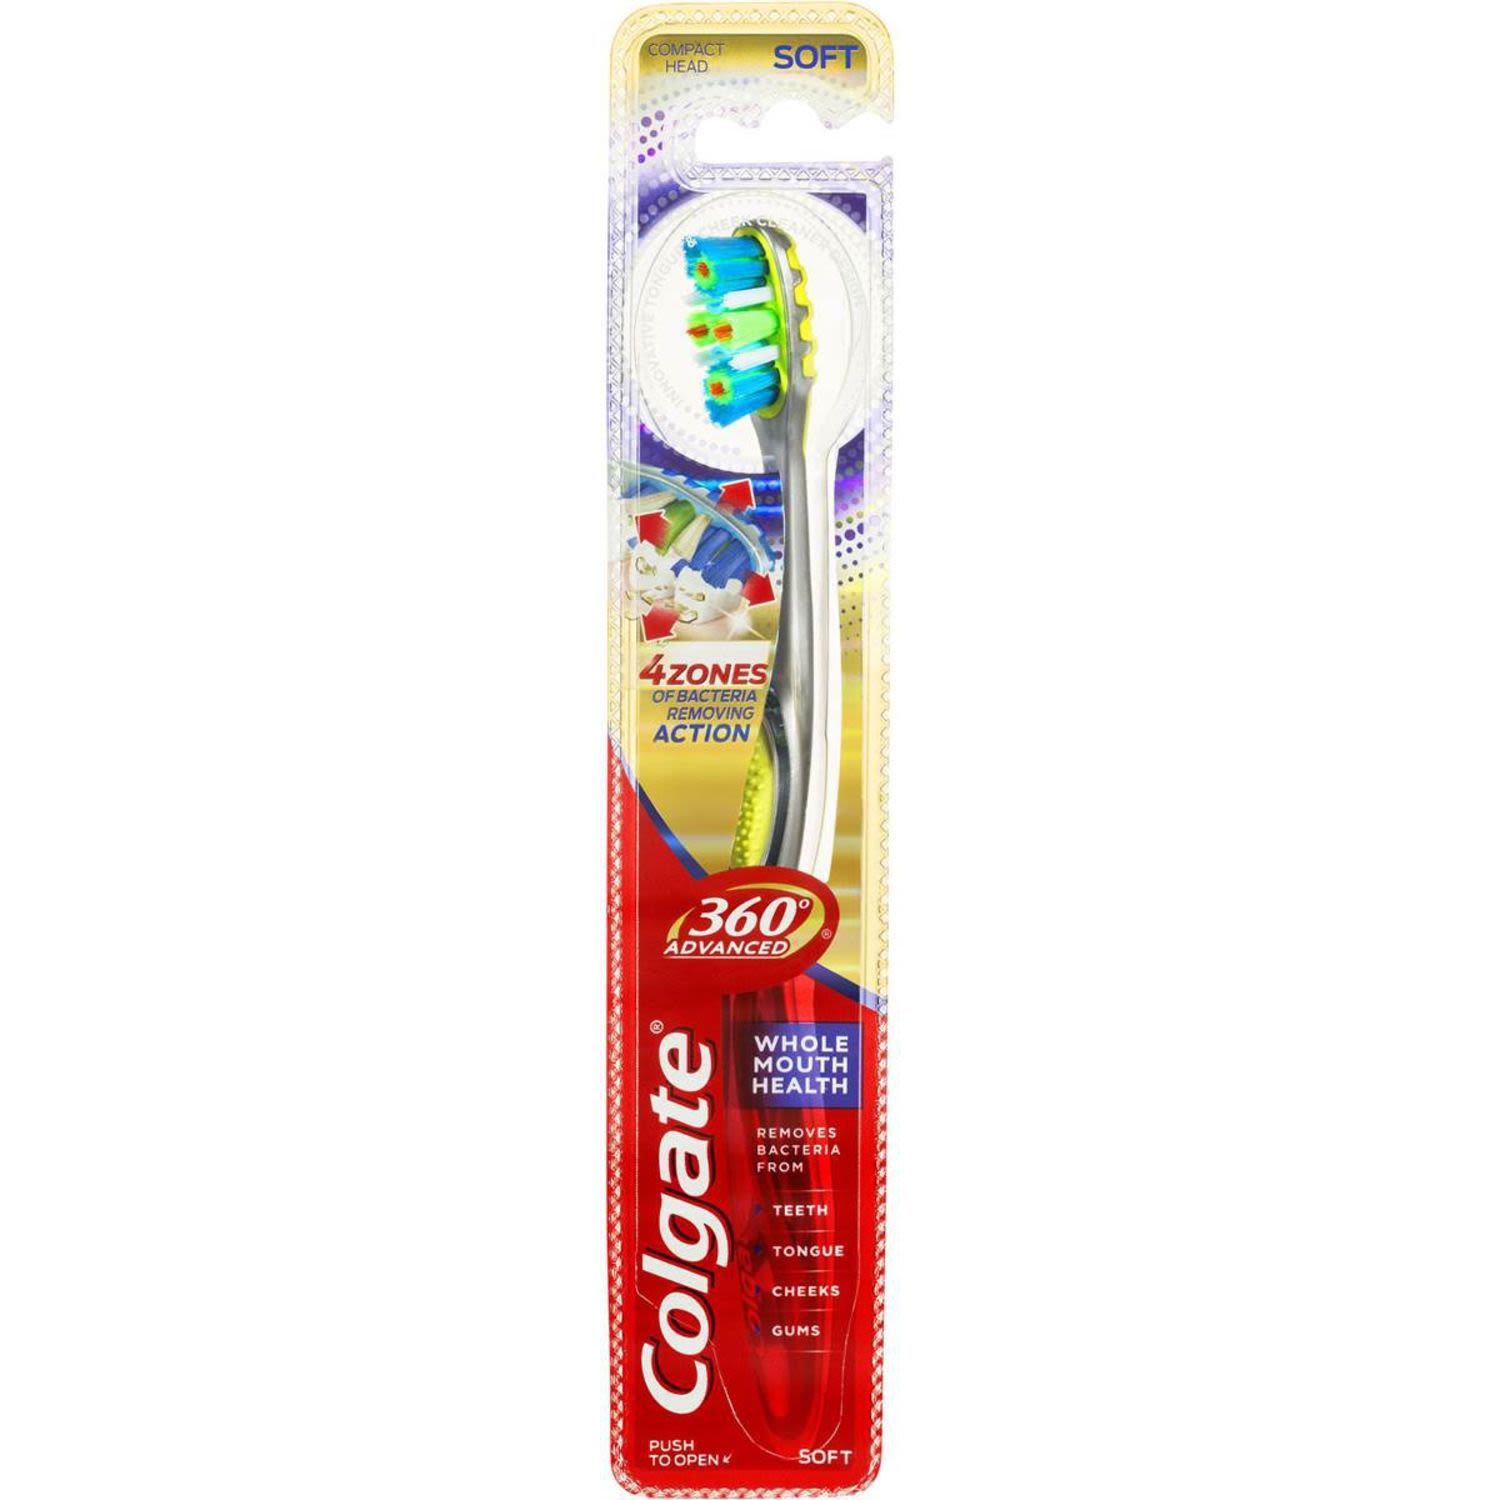 Colgate 360 Degrees Advanced Active Plaque Removal Toothbrush Soft, 1 Each